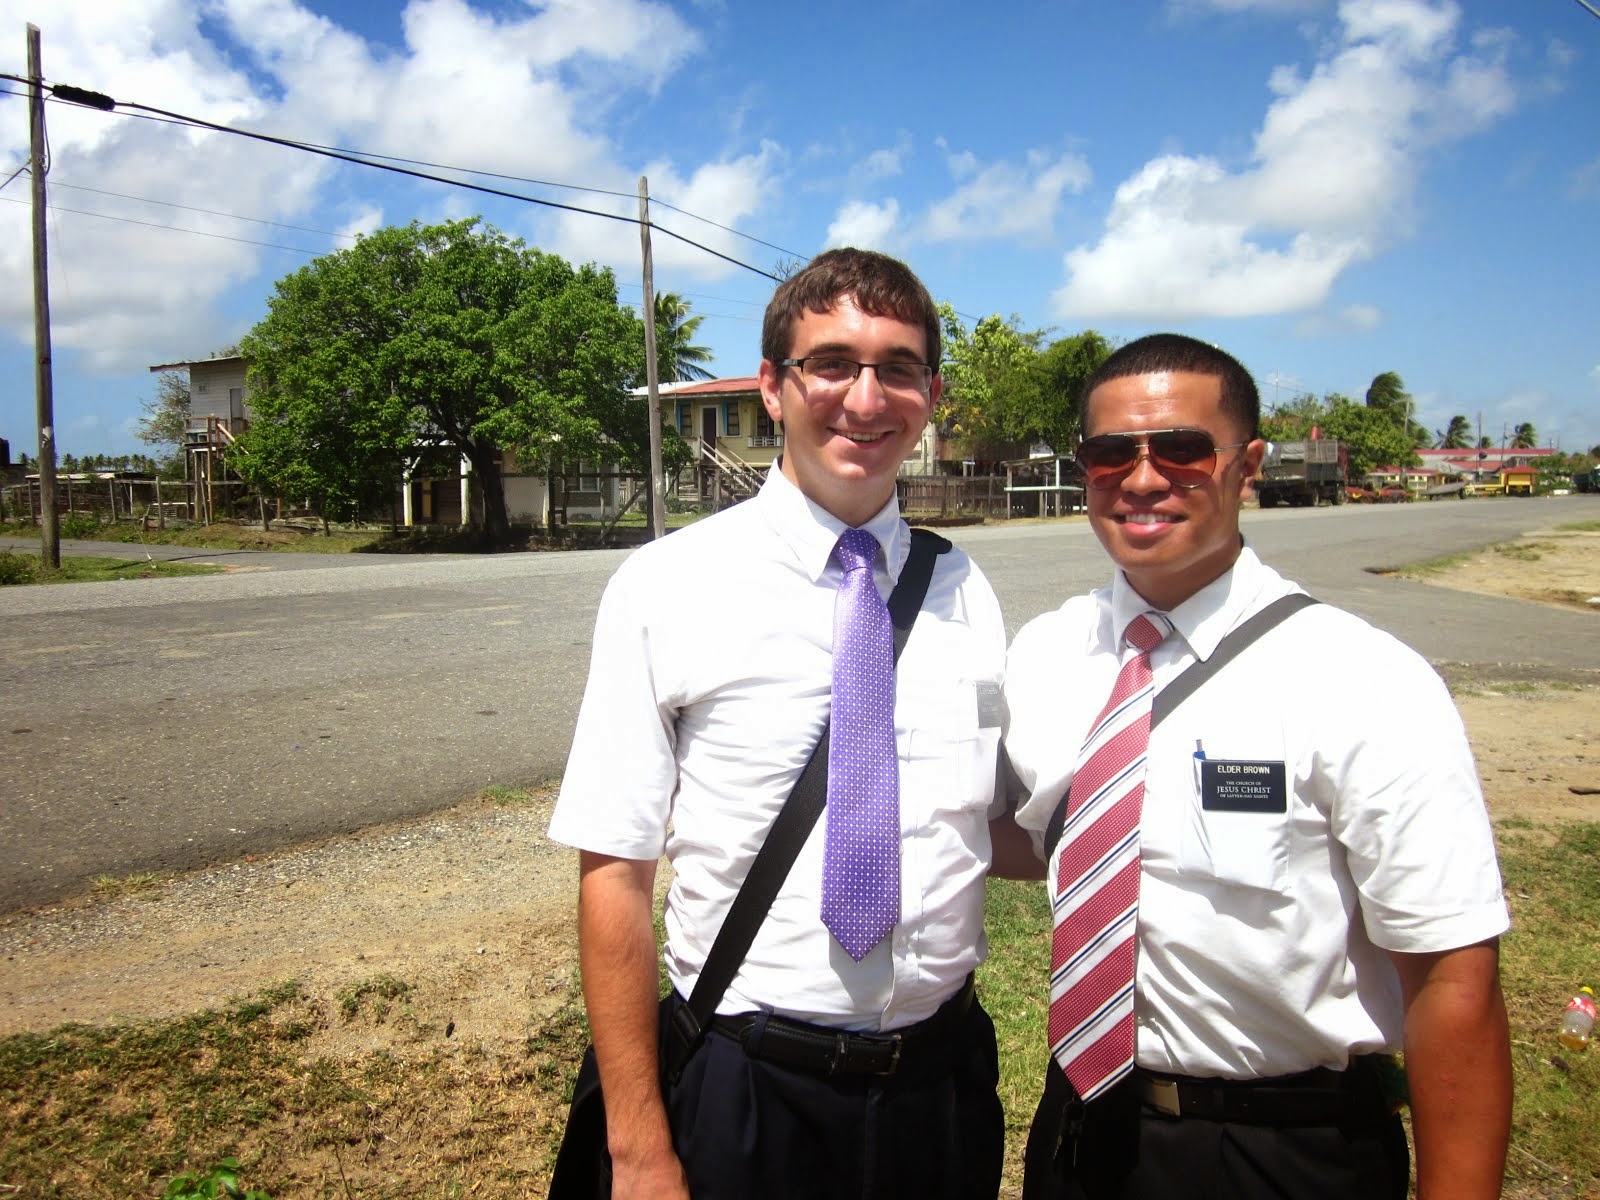 The district leader, Elder Sharren, and I on our trade-off.